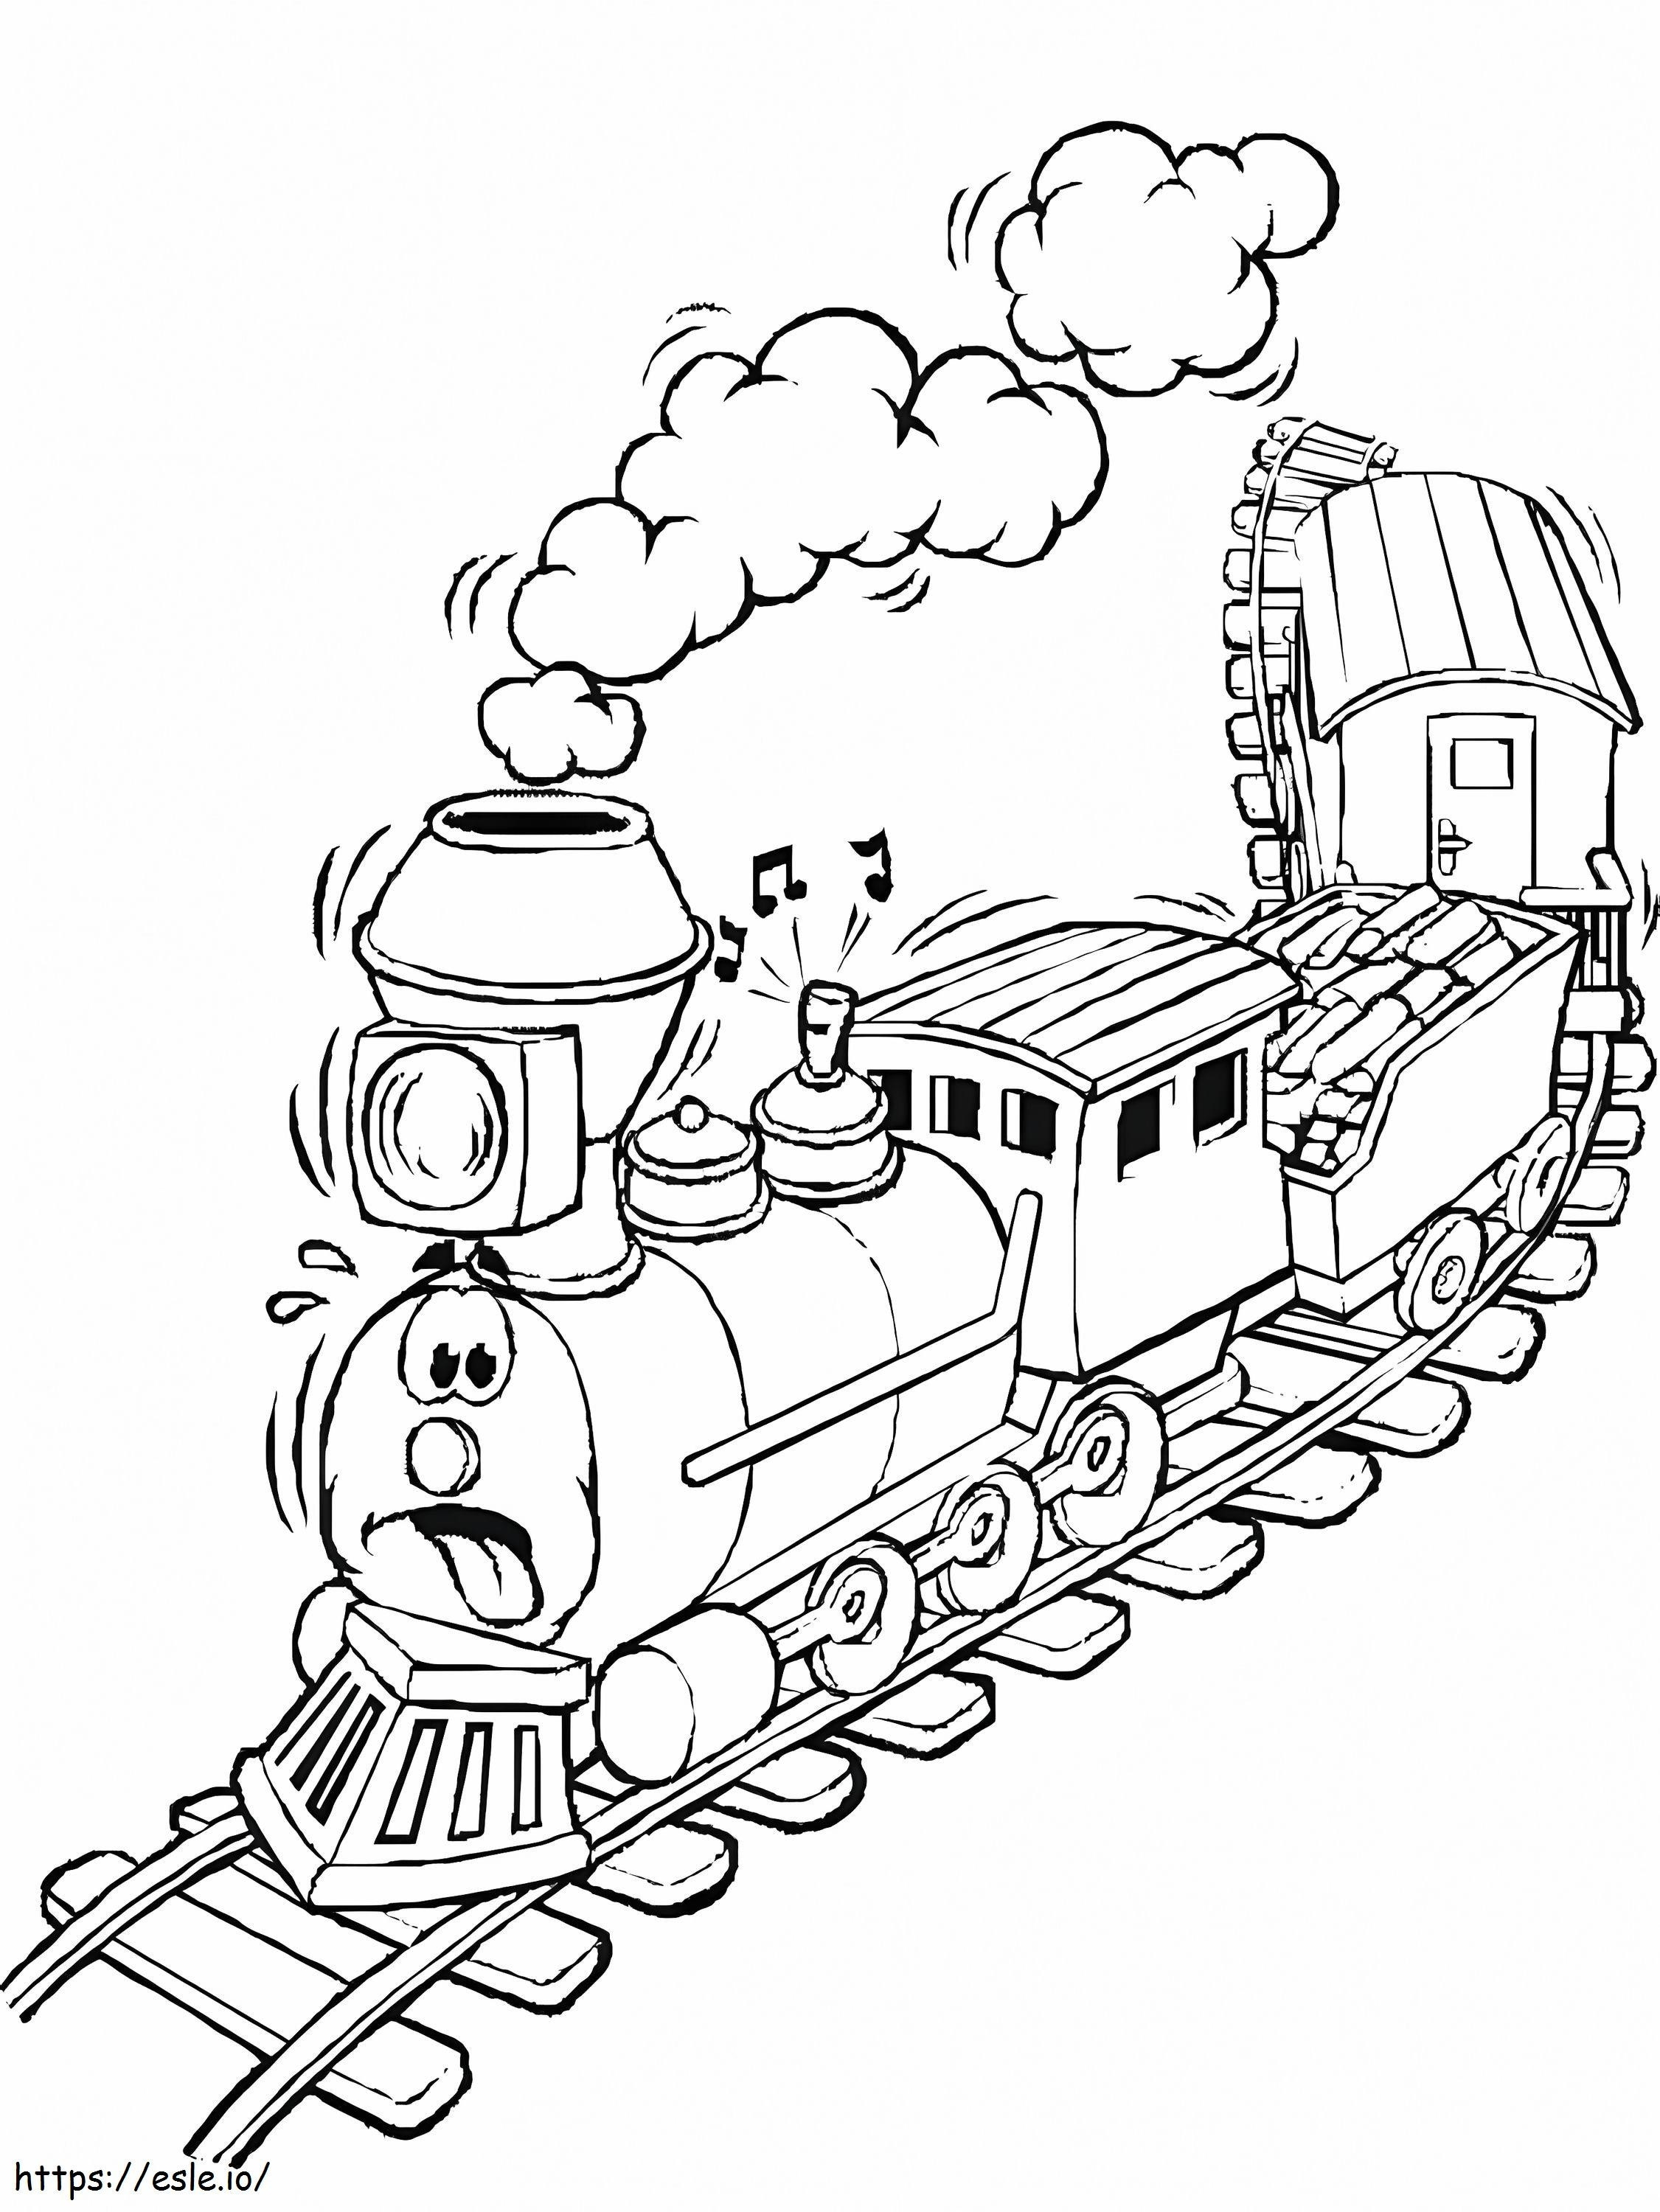 Polar Express Train coloring page